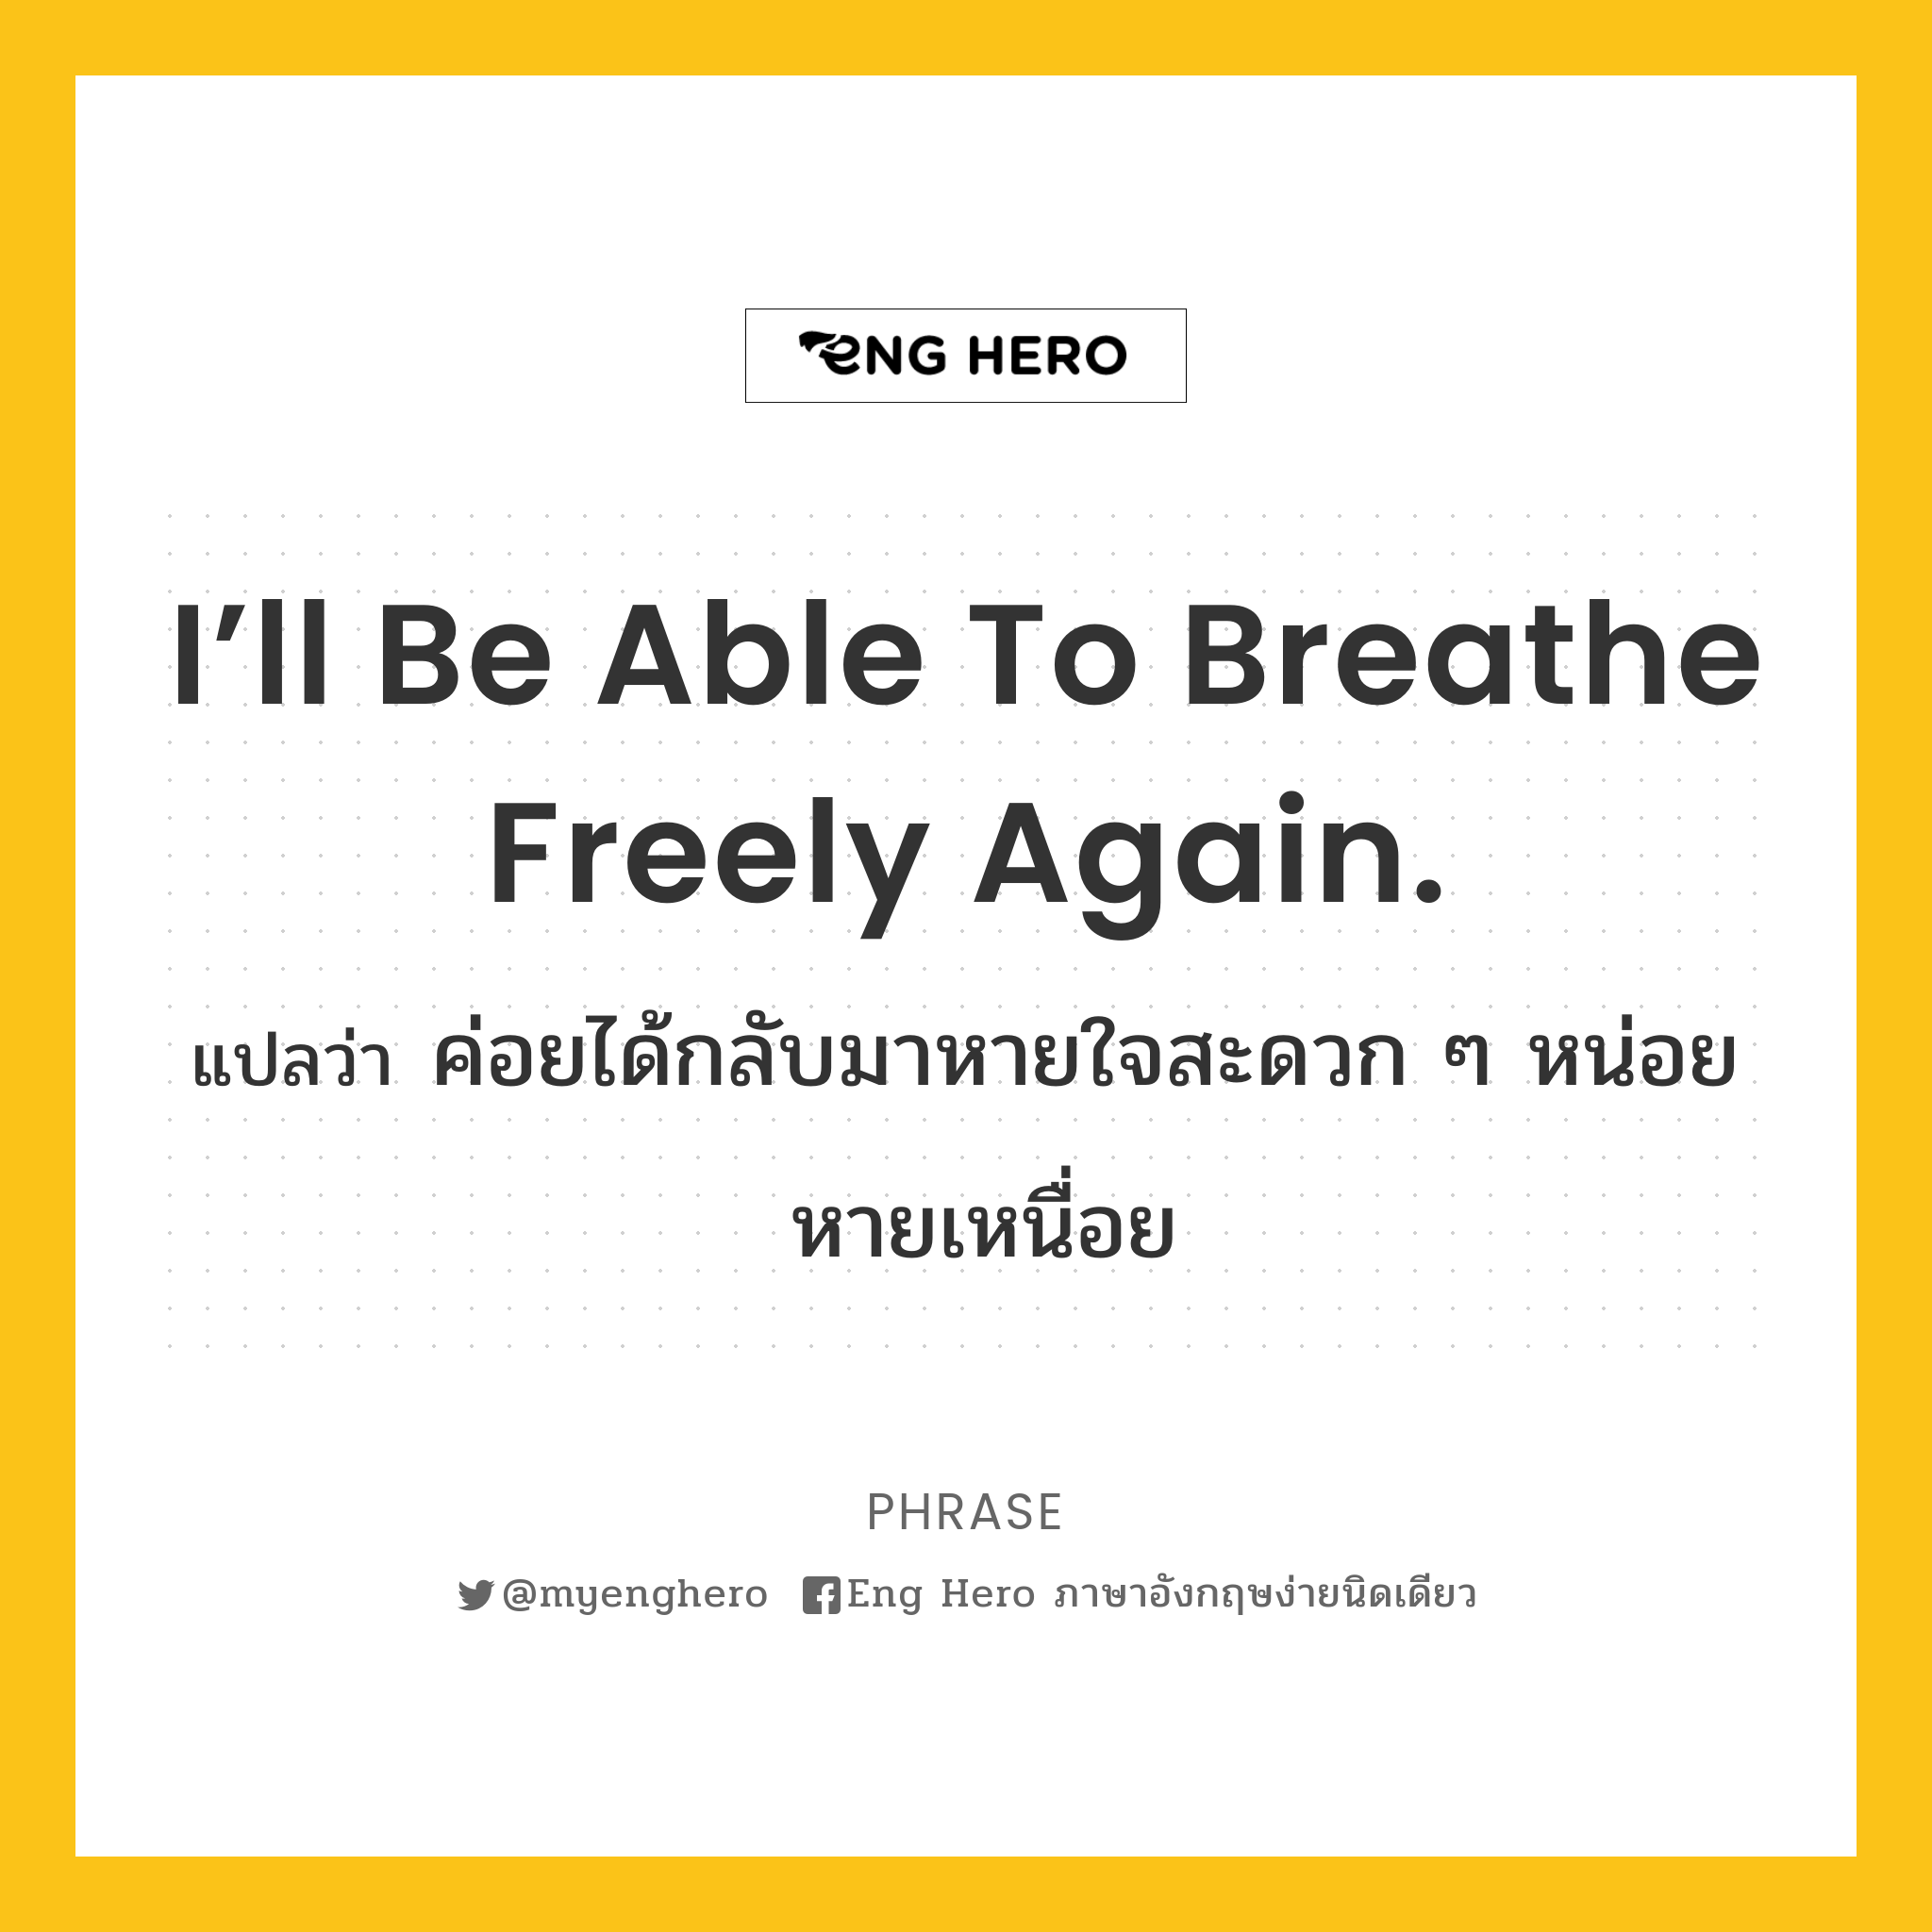 I’ll be able to breathe freely again.